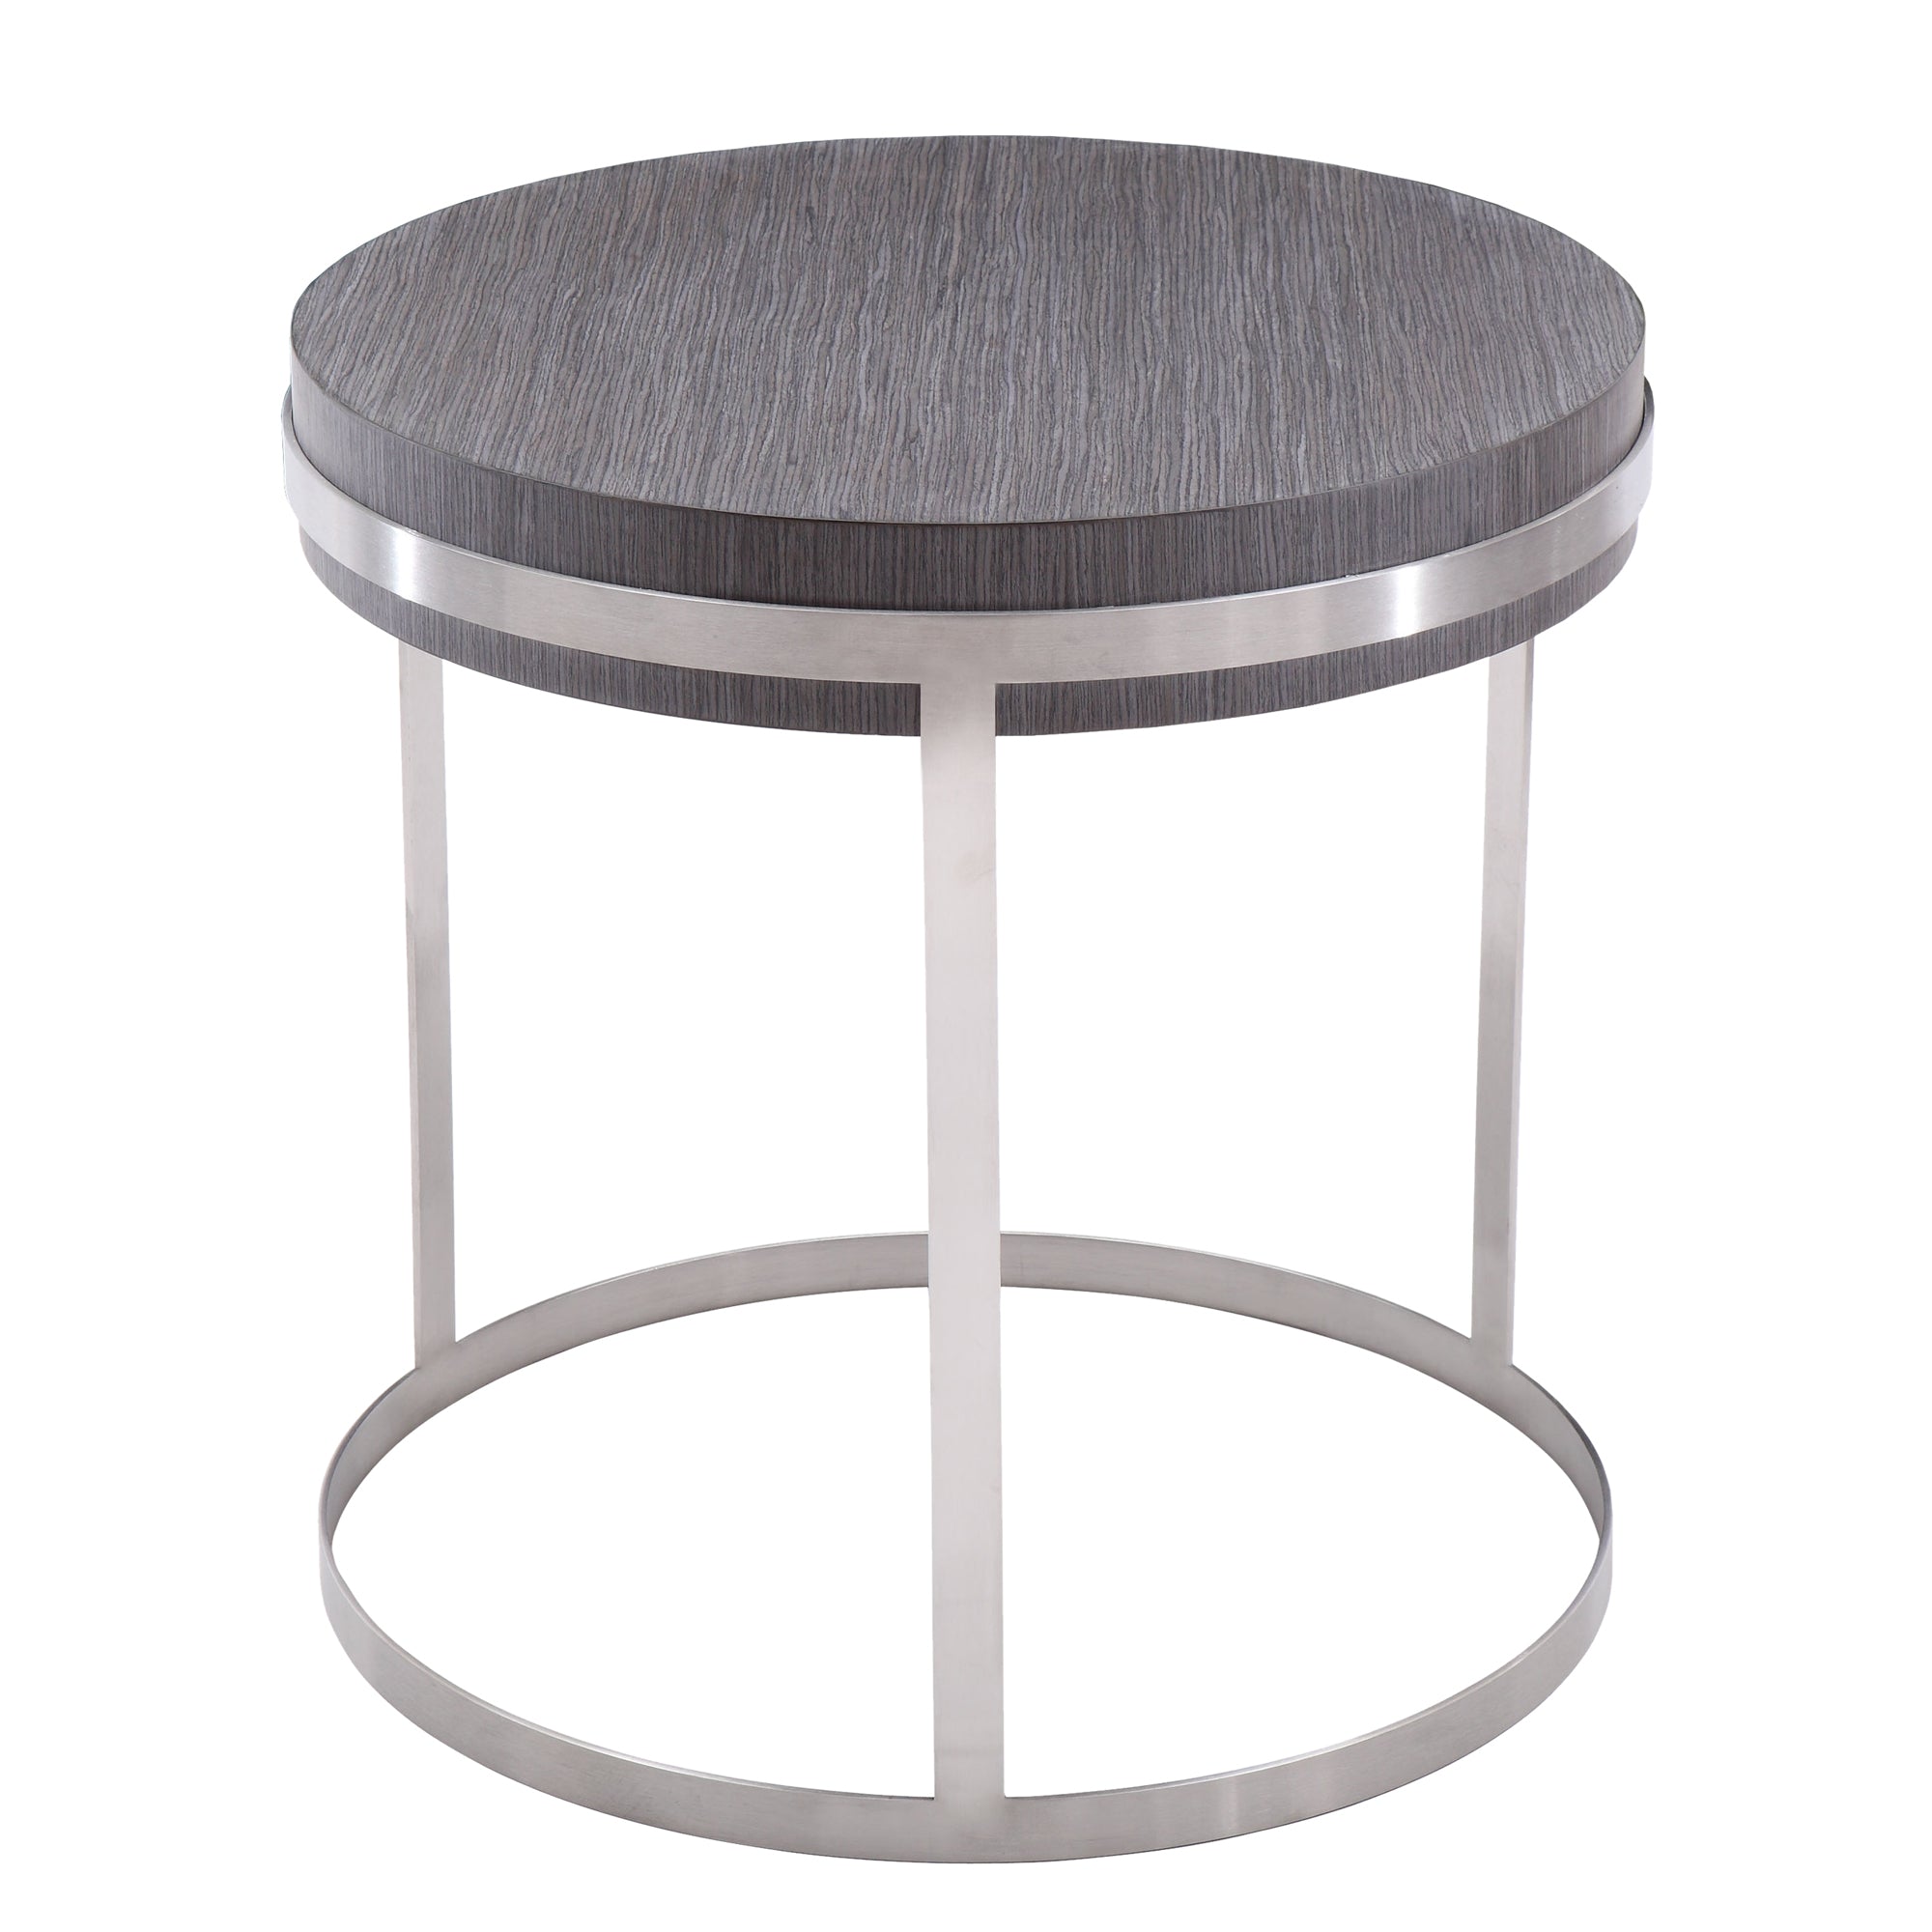 Armen Living Lcsulagr Sunset End Table In Brushed Stainless Steel Finish With Grey Top